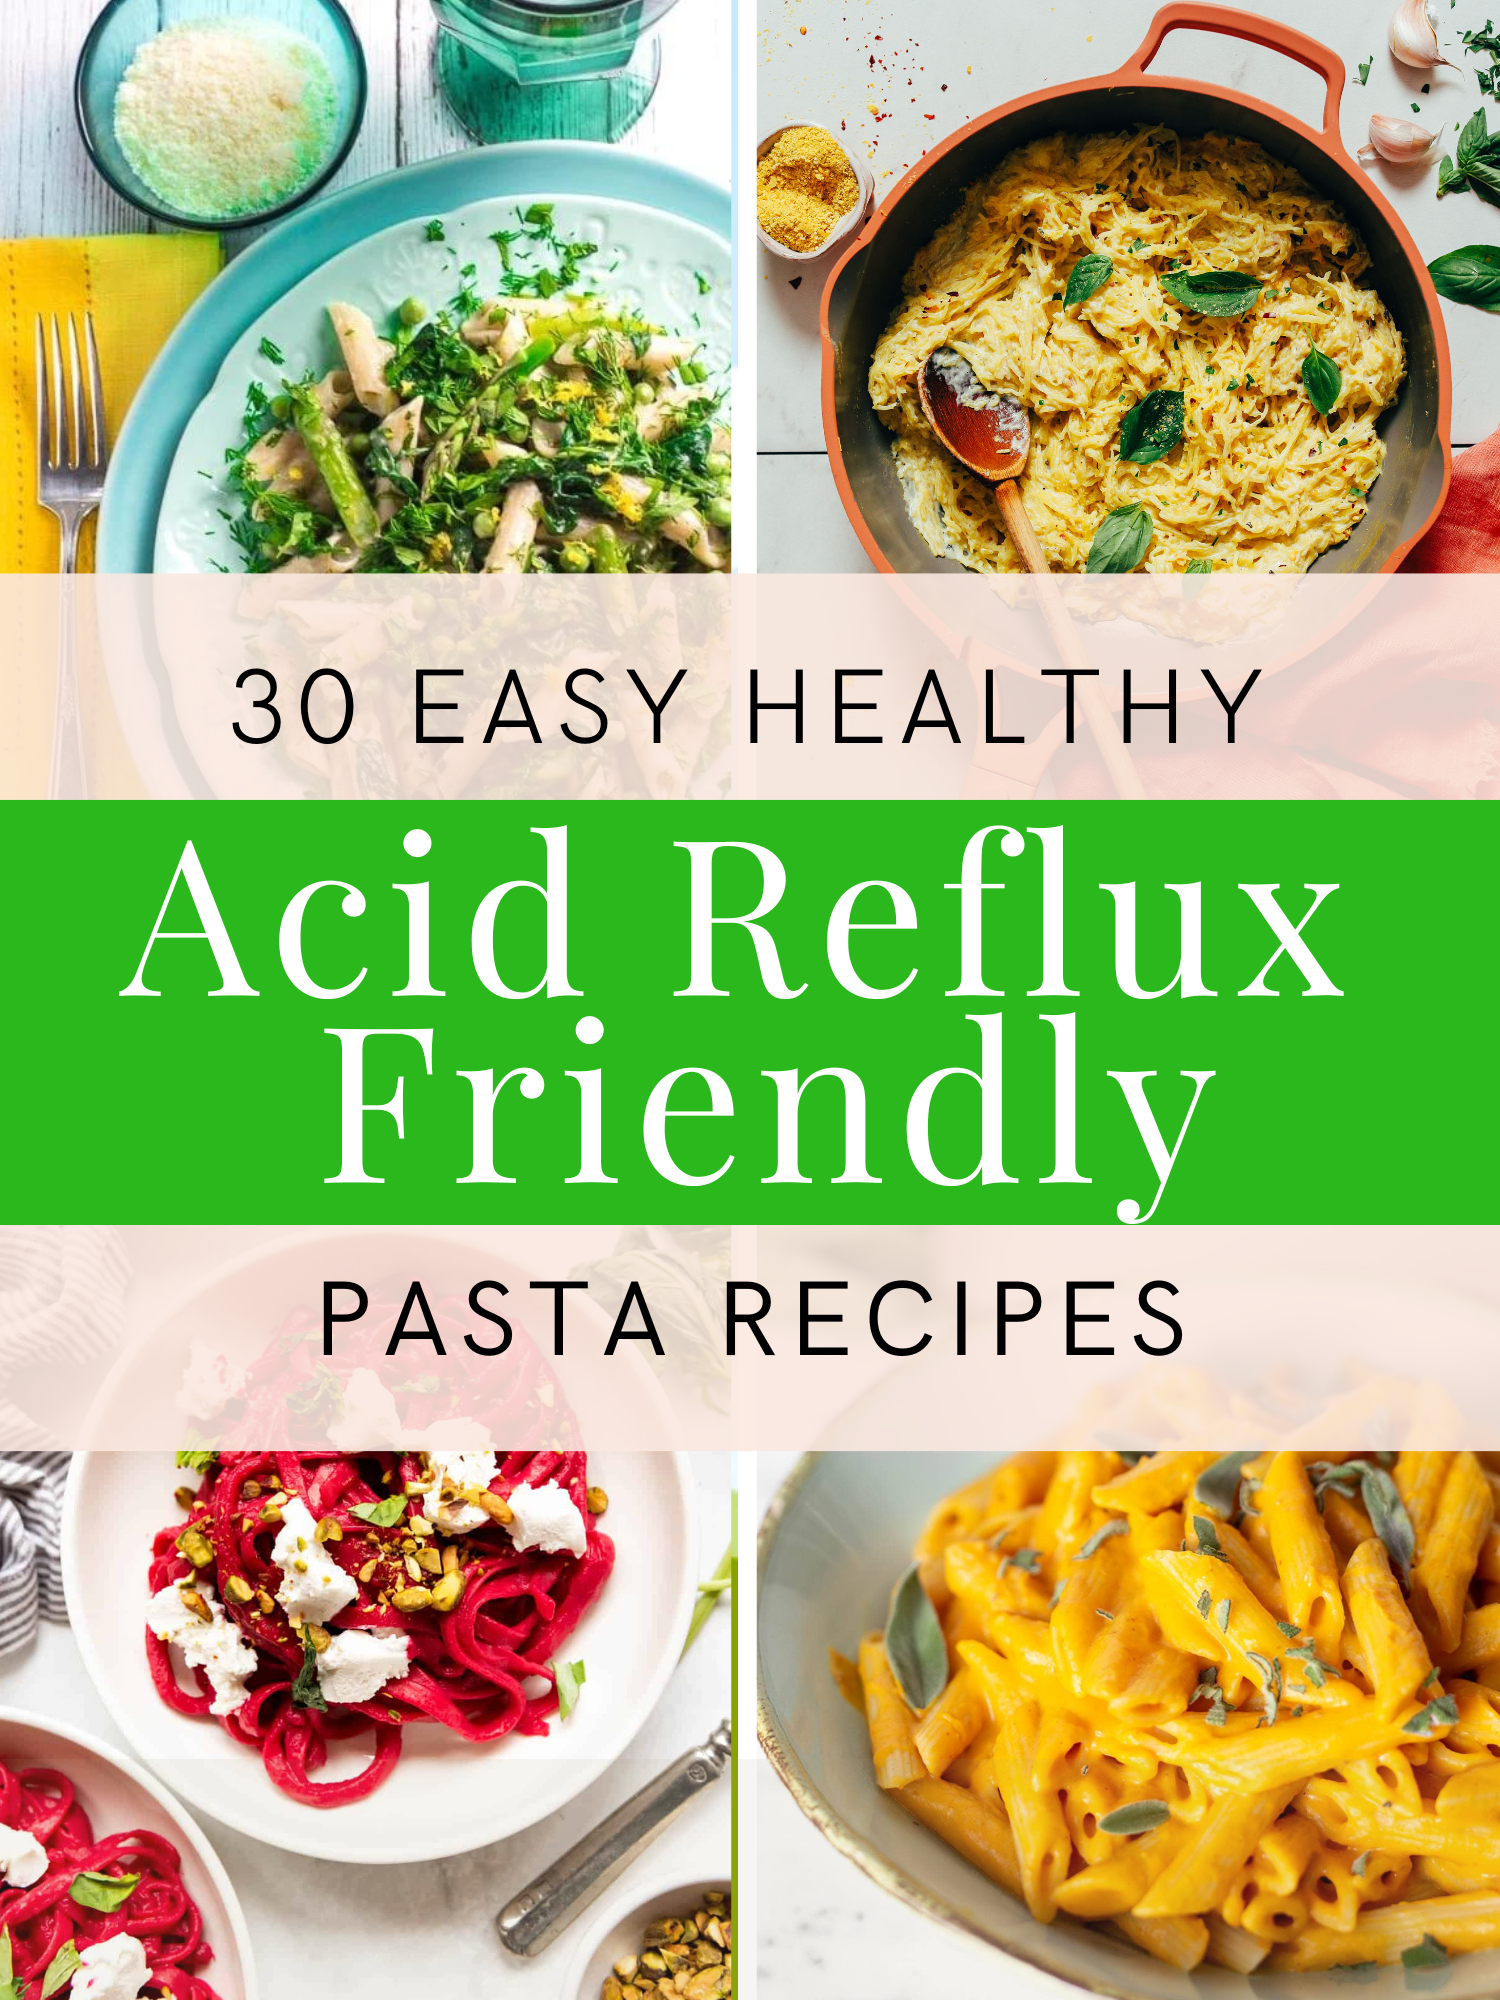 Title image with four small images of easy healthy reflux friendly pasta recipes